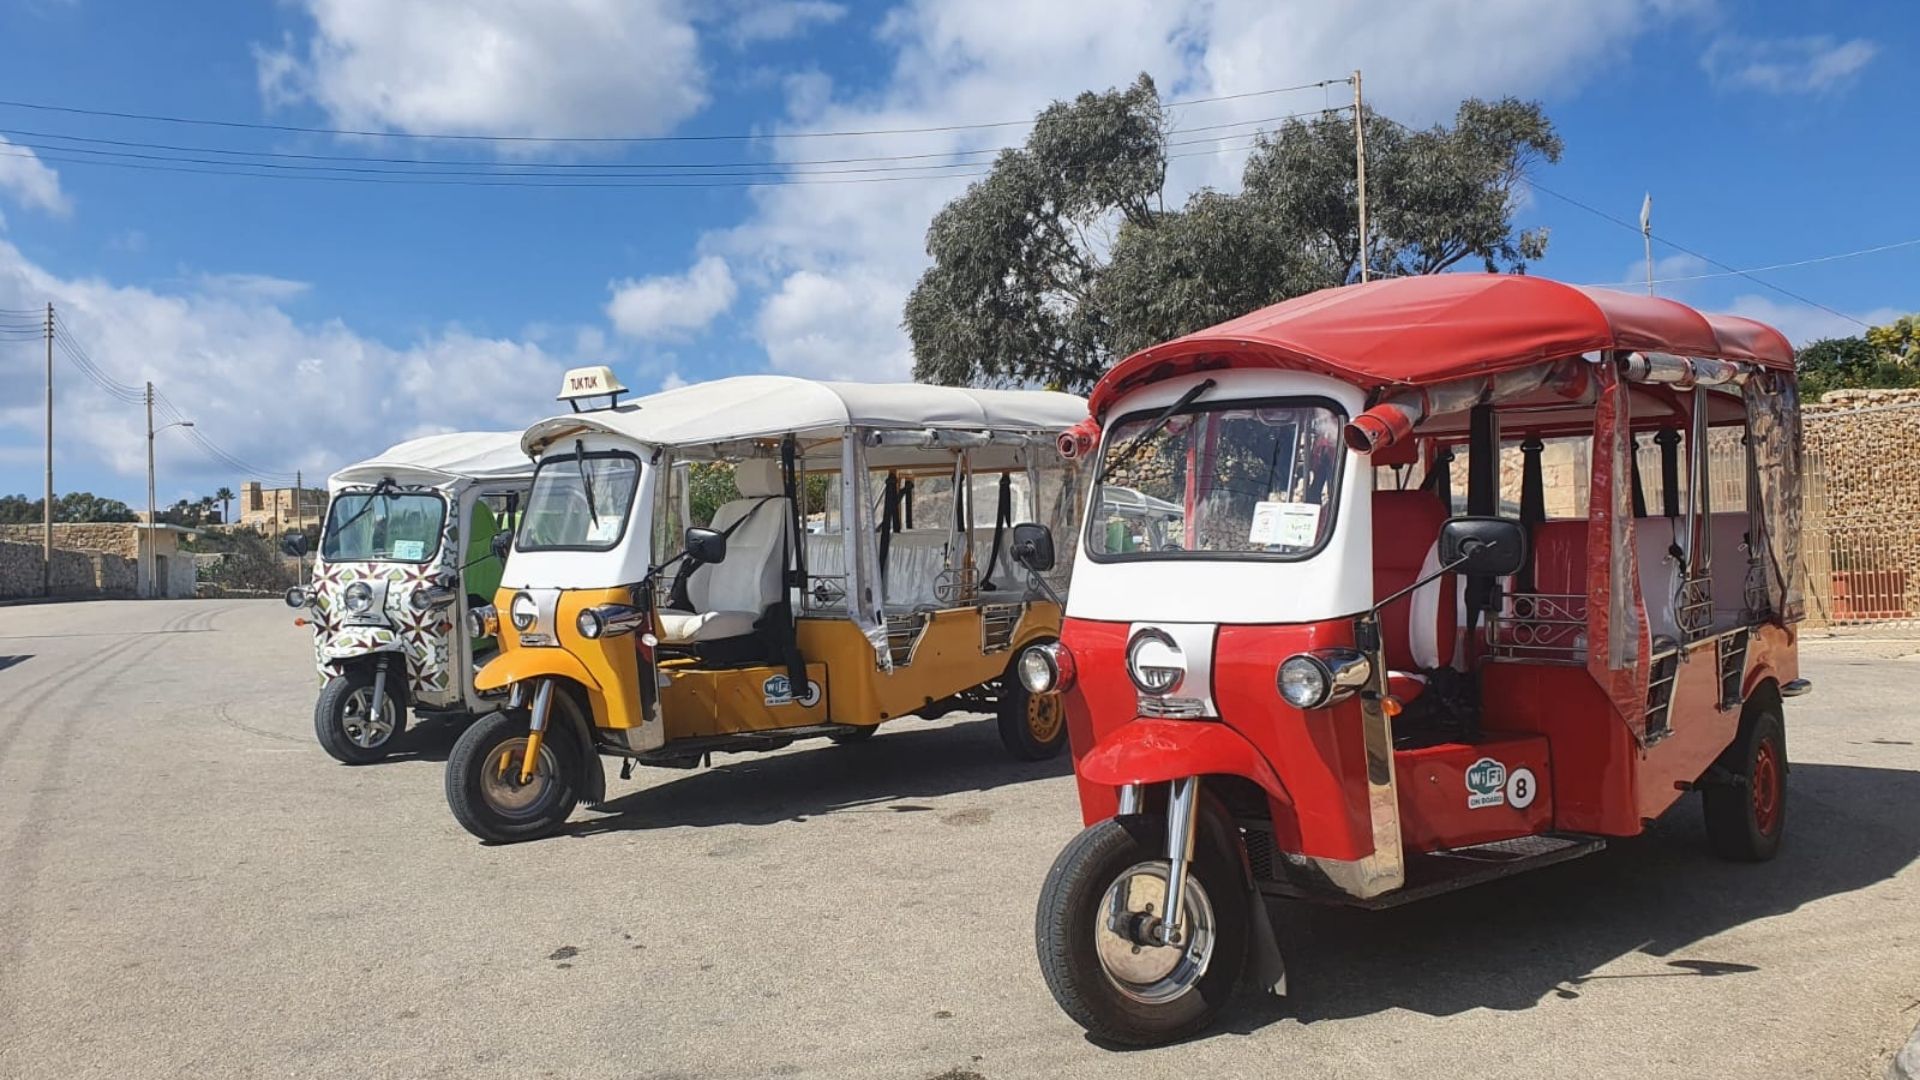 Incentive group and tuktuk challenge